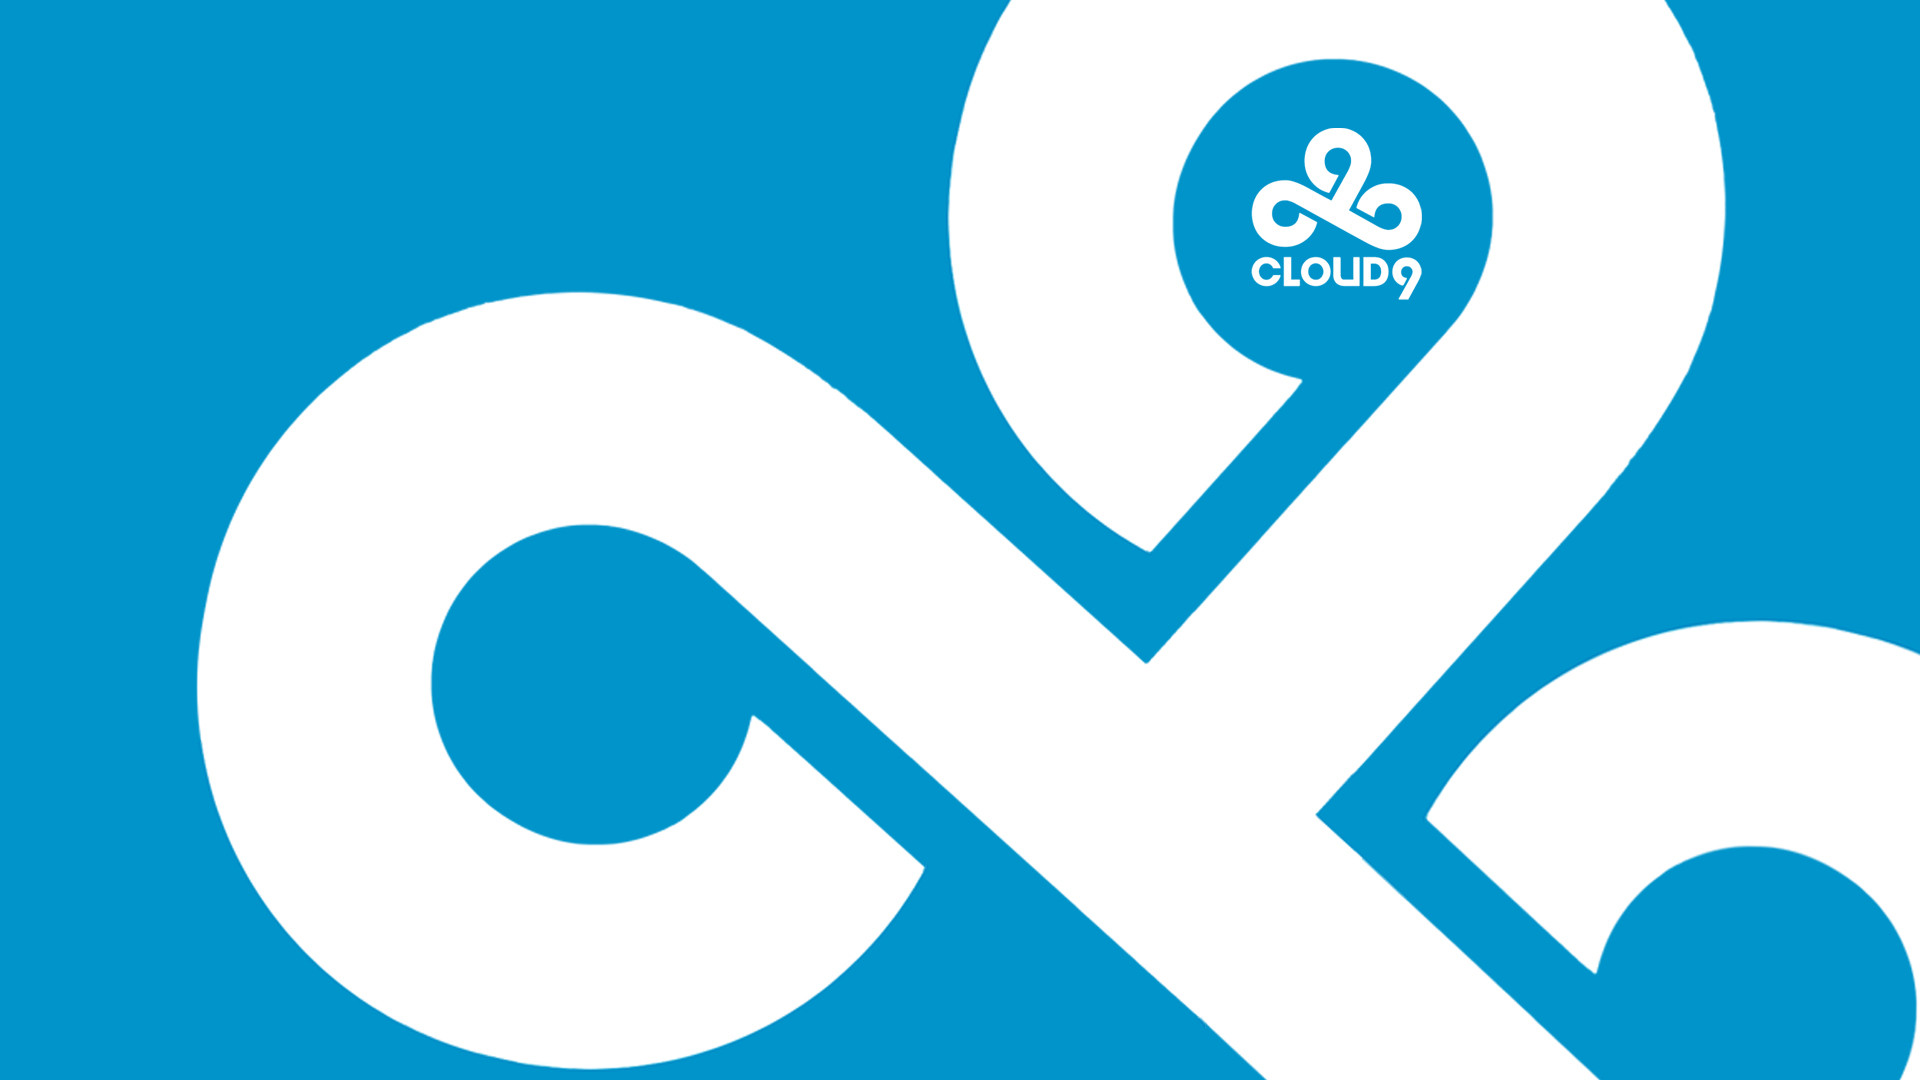 1920x1080 Simple Cloud9 Wallpaper based on the new jersey.